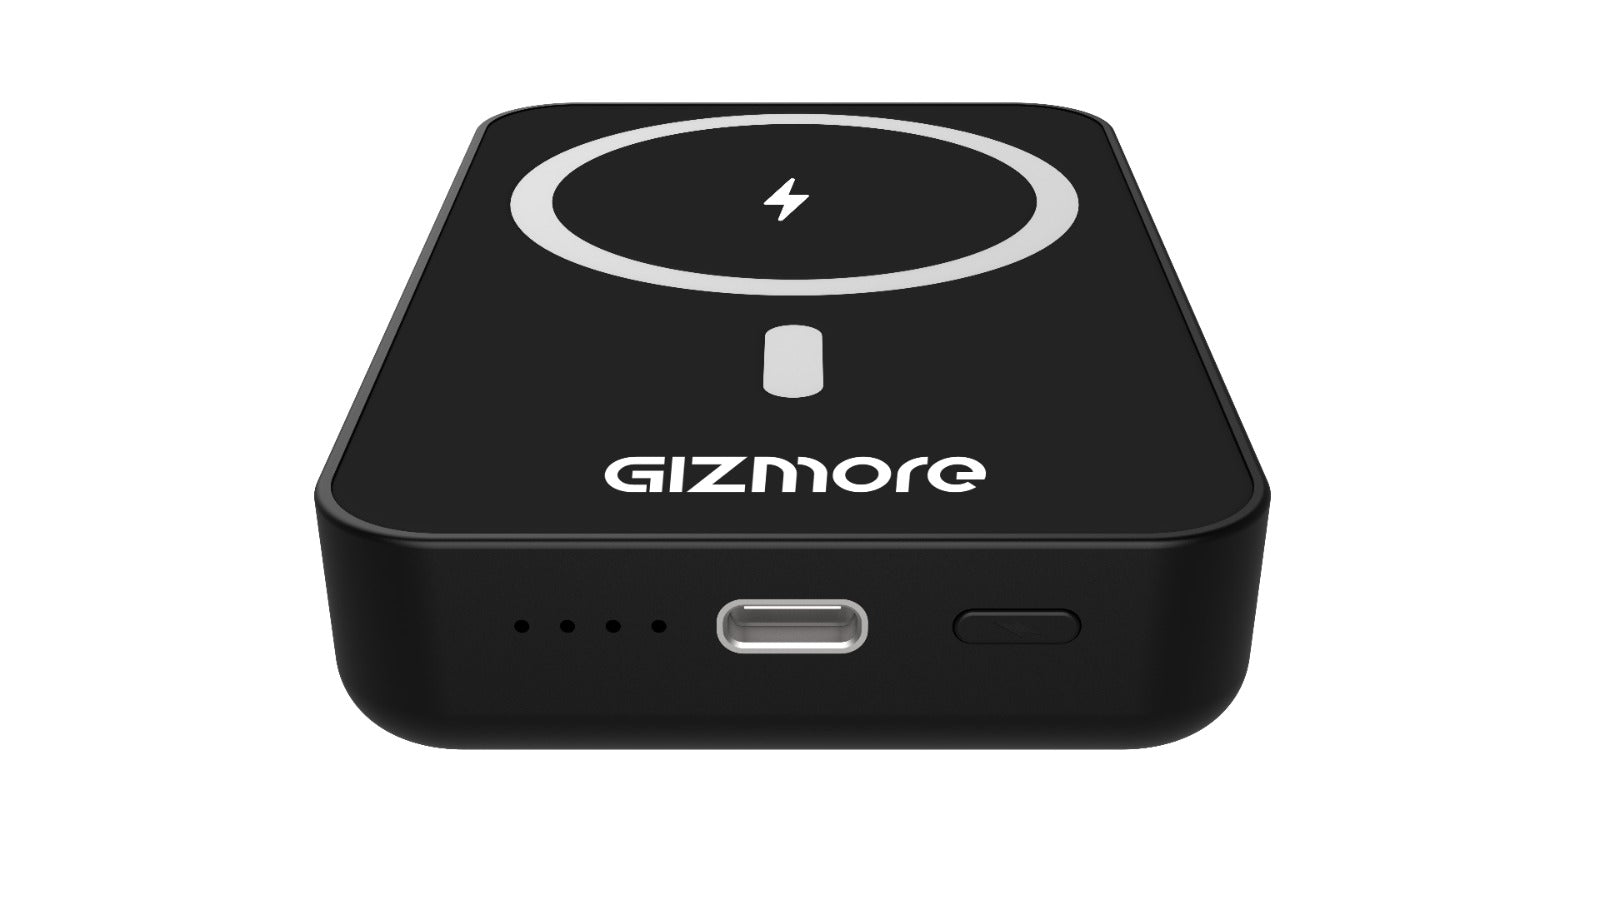 GIZMORE iMAG POWER 10000mAh 15W Strong Magnetic Wireless Charging + 22W Wired Charging |Type C PD (Input & Output) Compatible with MagSafe Cover | Li–On Power Bank for iPhones & Tablets